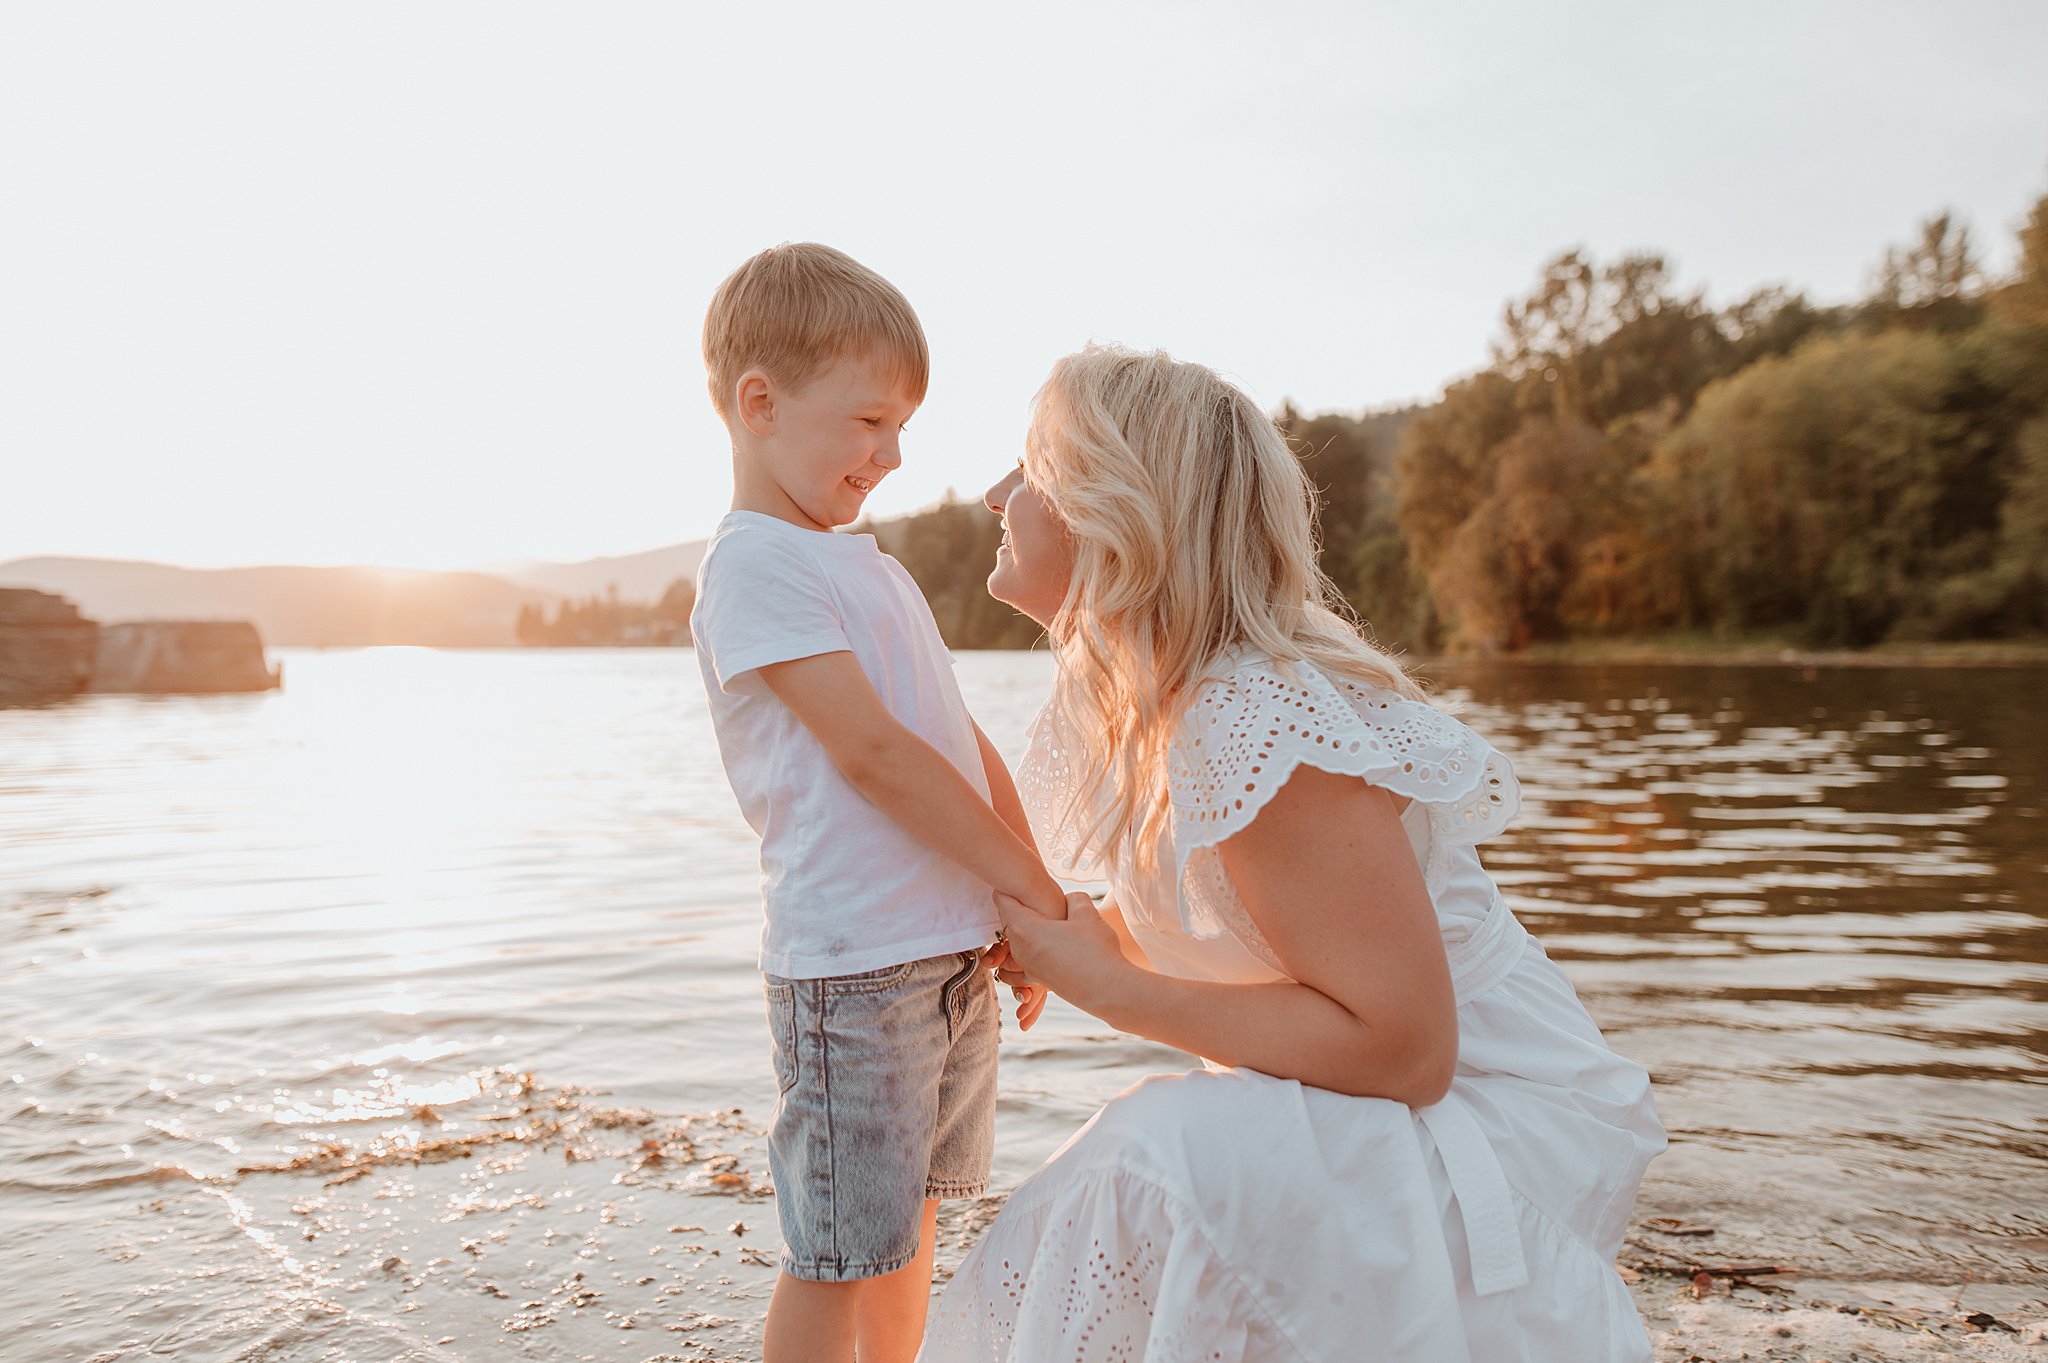 A mother in a white dress kneels down on a lake's edge to play with her toddler son at sunset